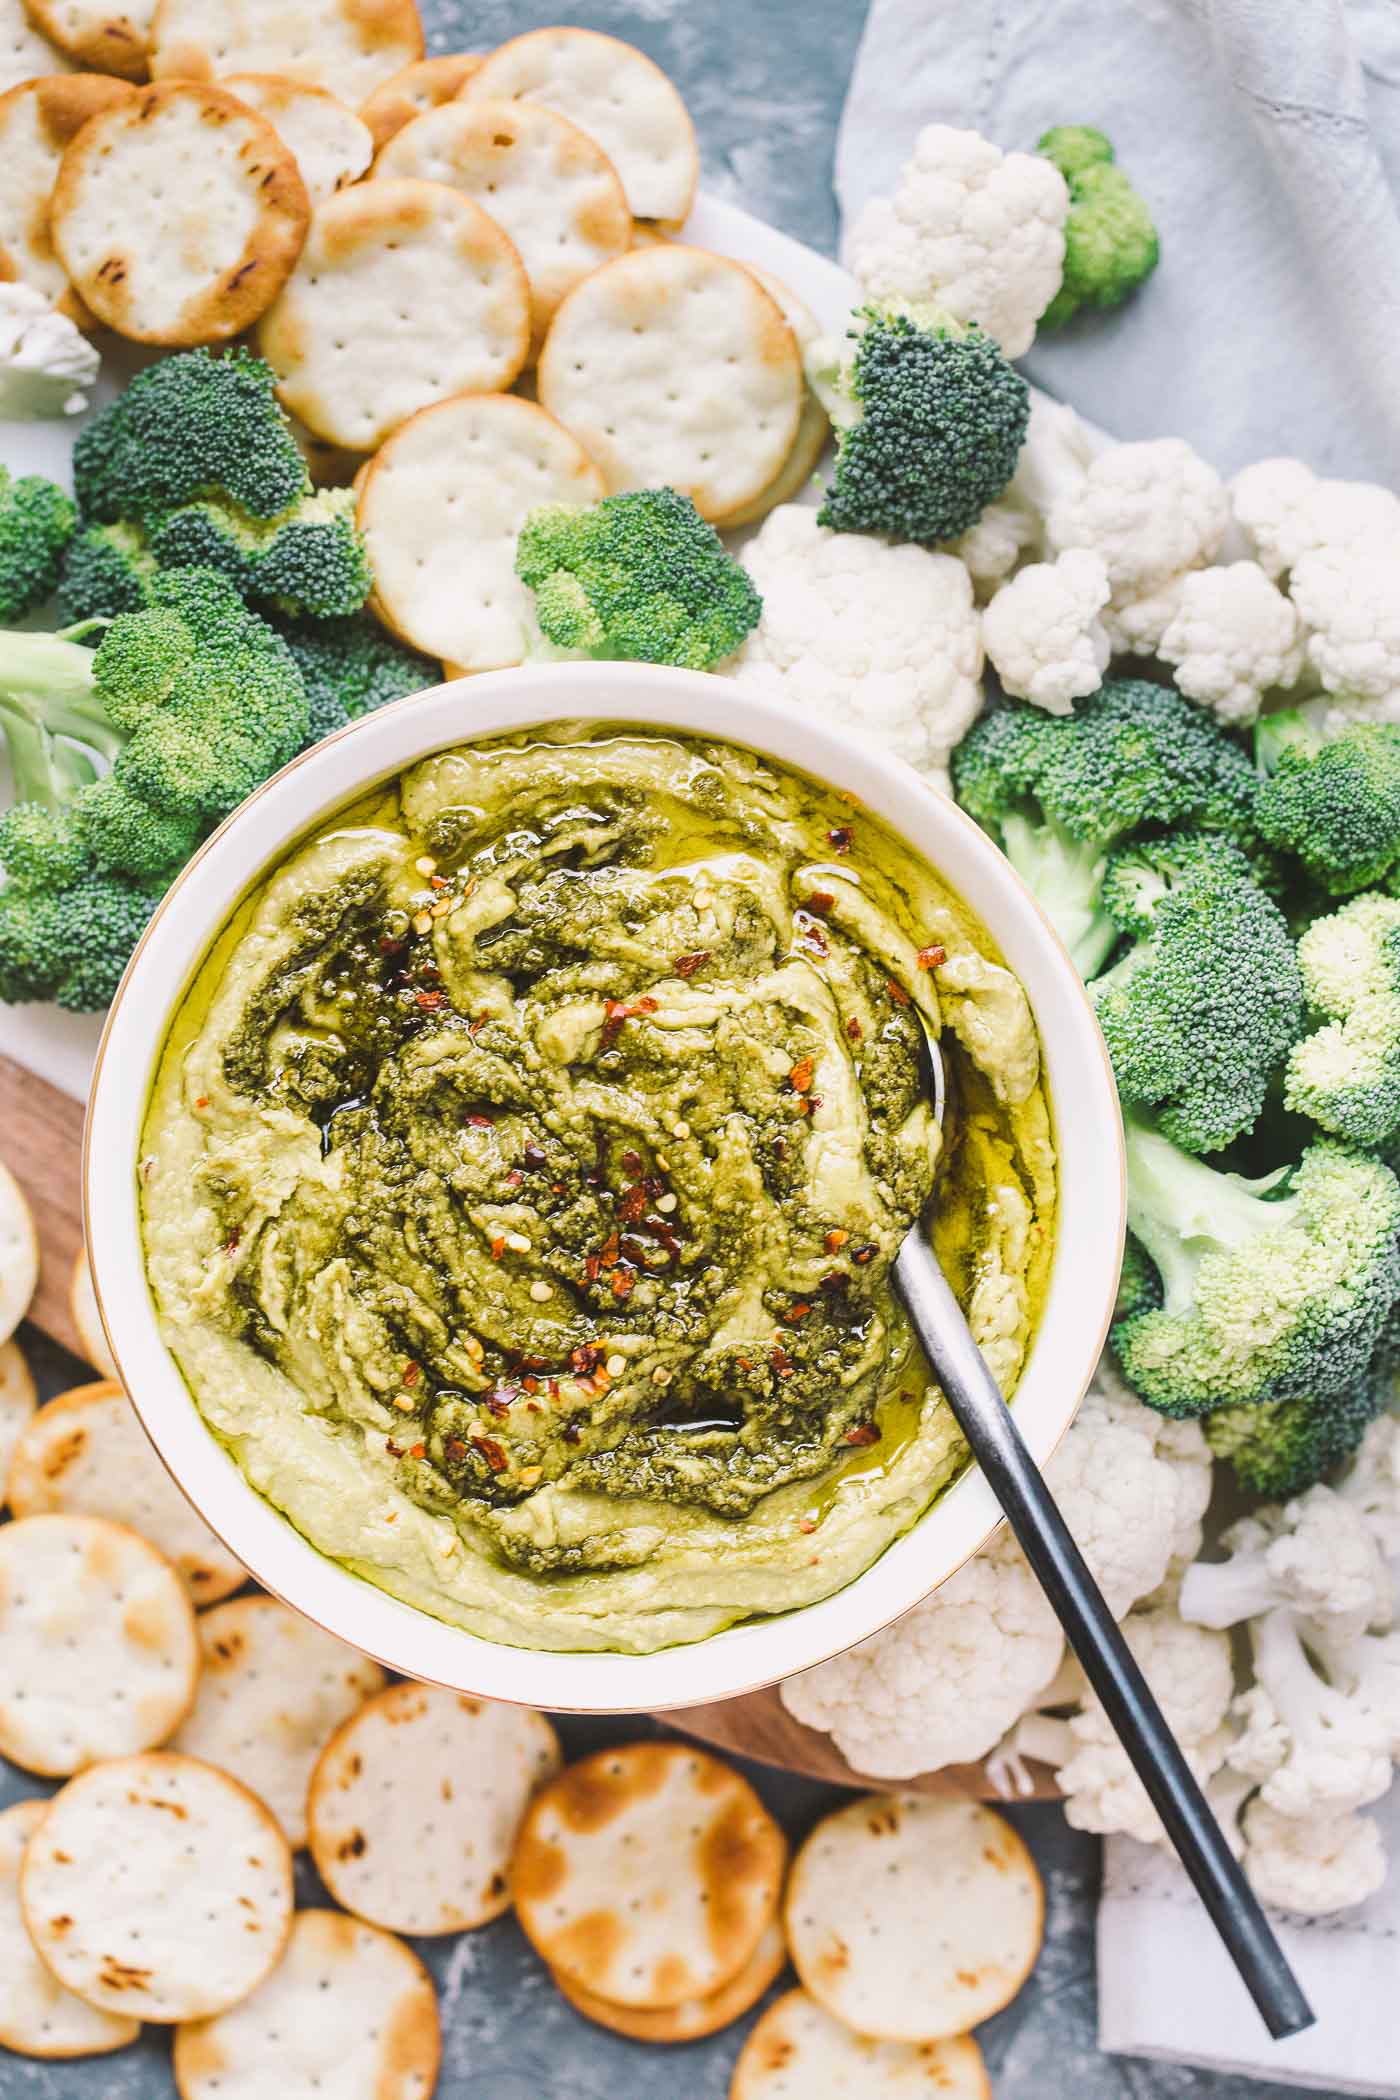  a creamy, dreamy, totally addictive white bean pesto hummus loaded with the bright flavors of pesto & lemon. perfect for healthy end-of-summer snacking!